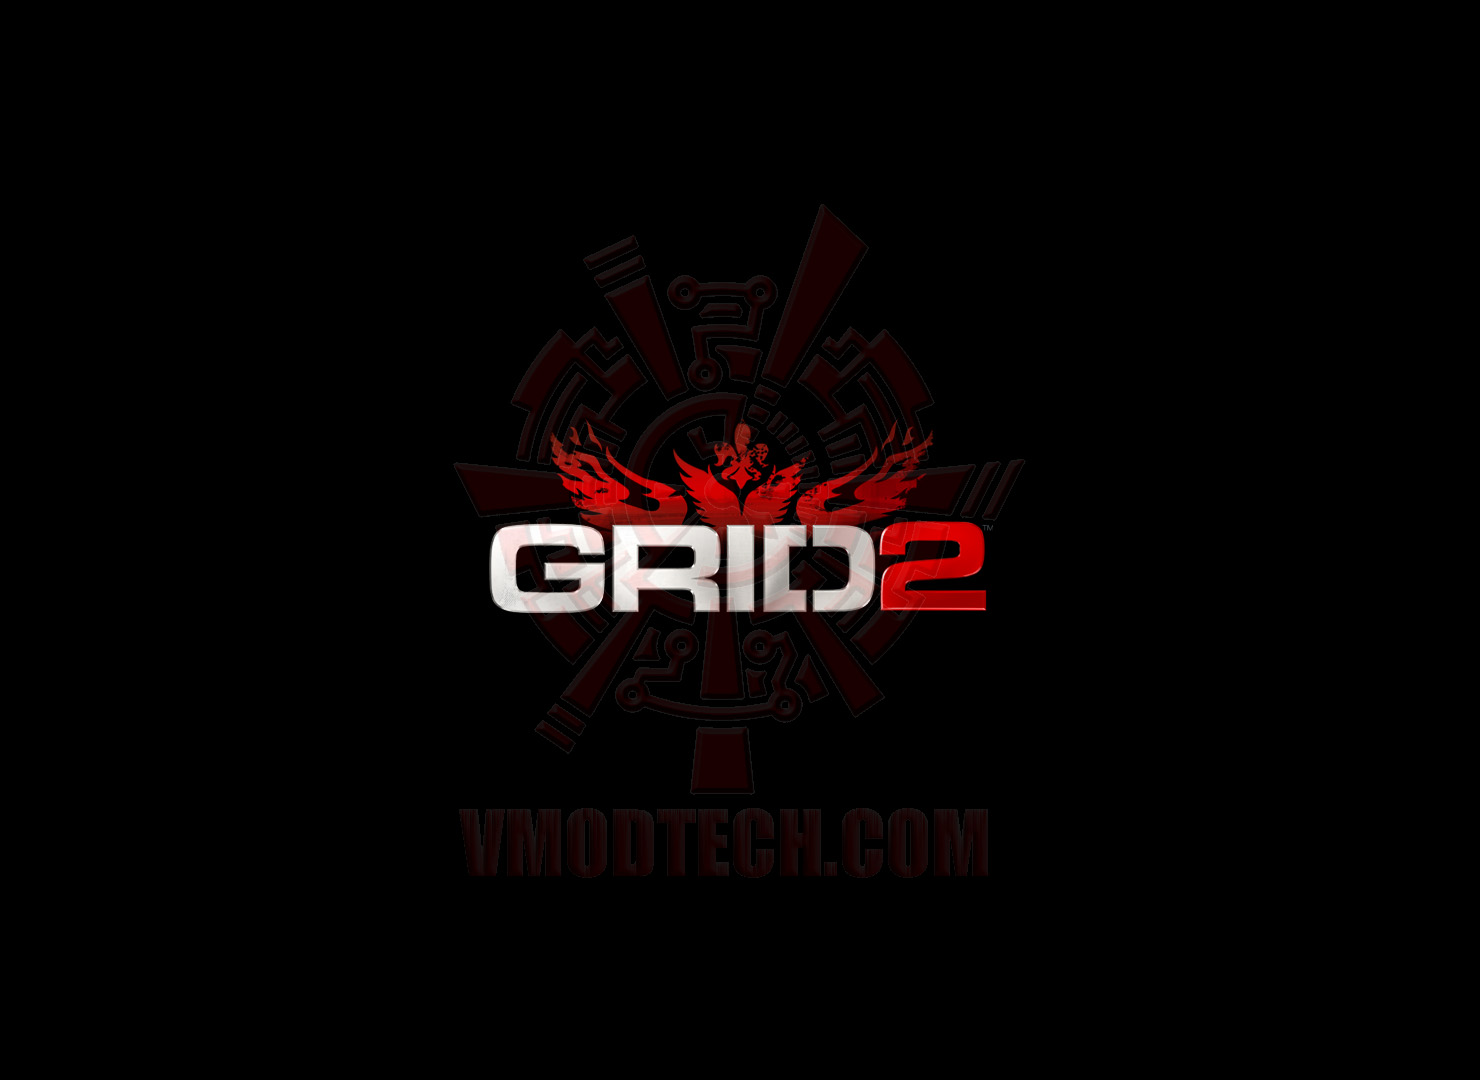 grid2 avx 2013 10 03 10 56 55 55 MSI H97M E35 Motherboard Review